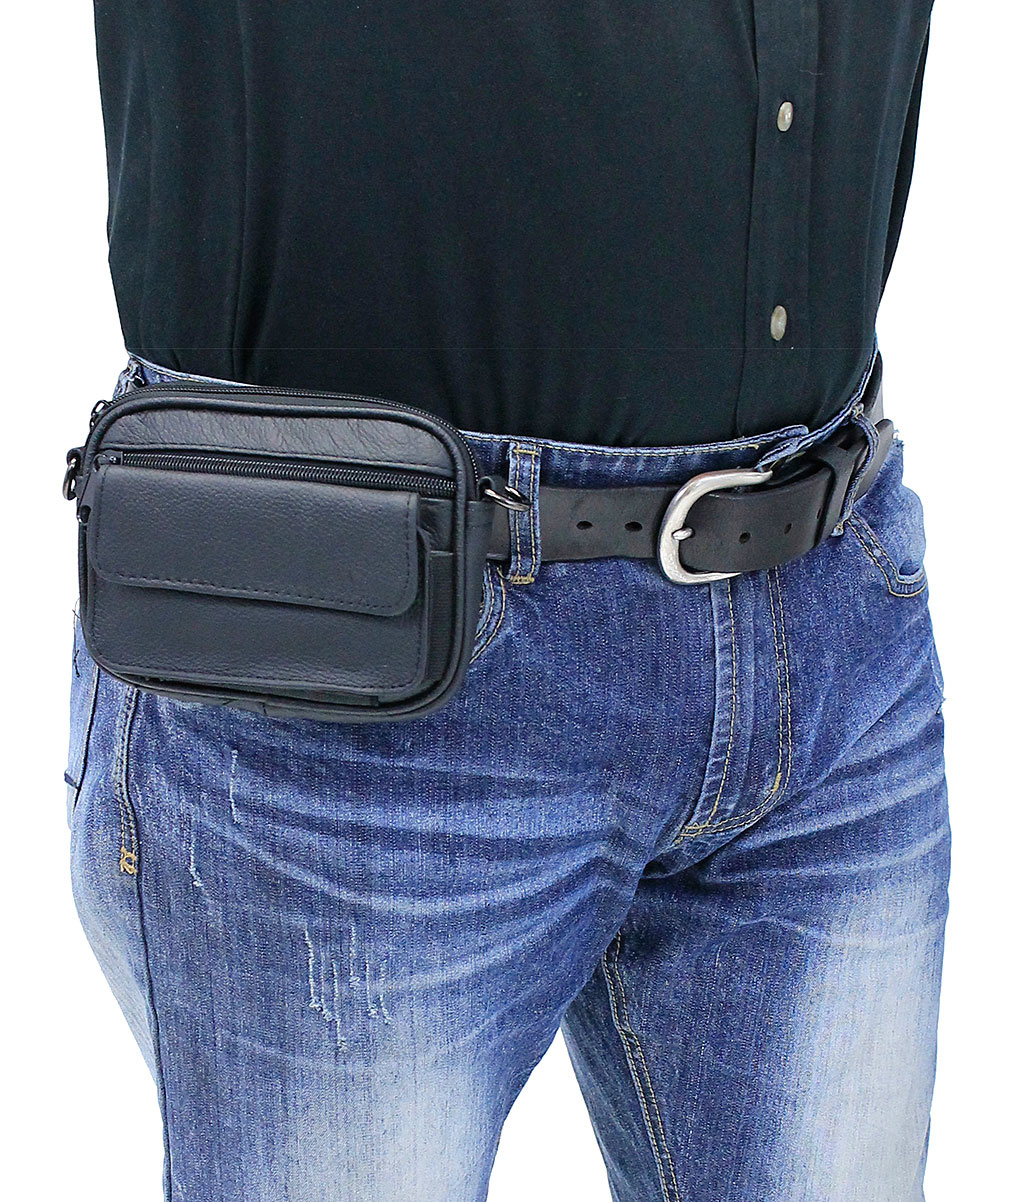 Leather Phone Pouch Utility Belt Holster With Crossbody Strap 